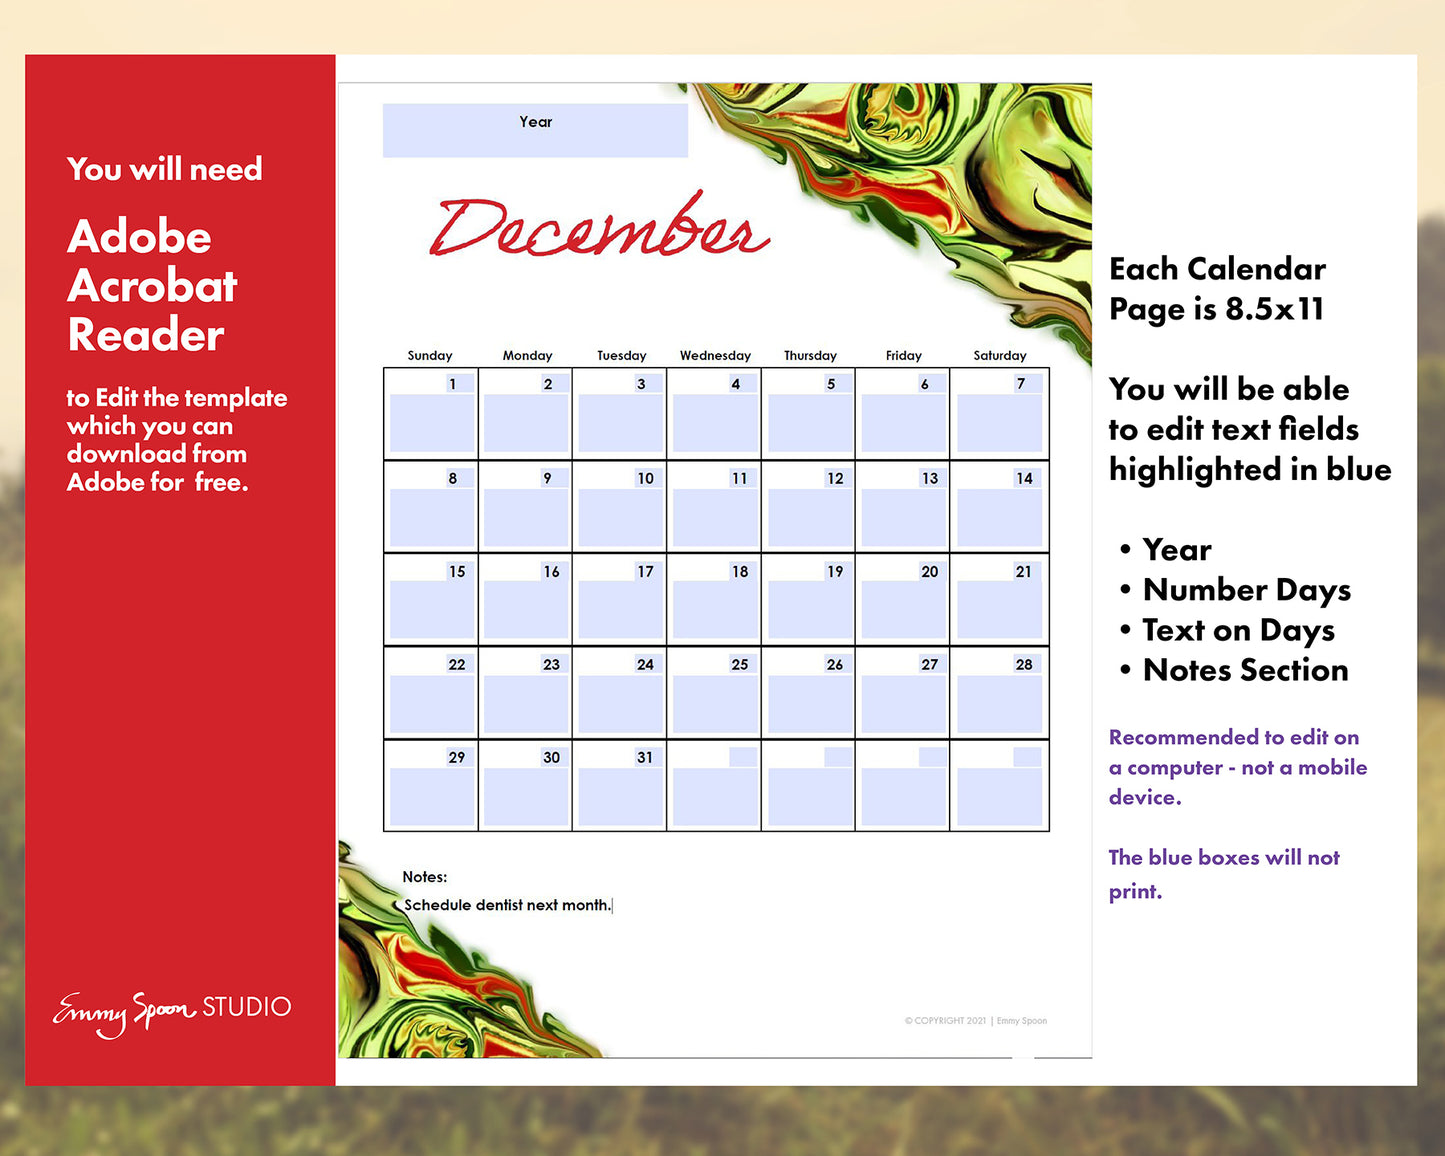 You will need Adobe Acrobat Reader to Edit the template which you can download from Adobe for free. Each calendar page is 8.5x11. You will be able to edit text fields highlighted in blue. Year, Number Days, Text on Days and Notes Section. Recommended to edit on a computer - not a mobile device. The blue boxes will not print.